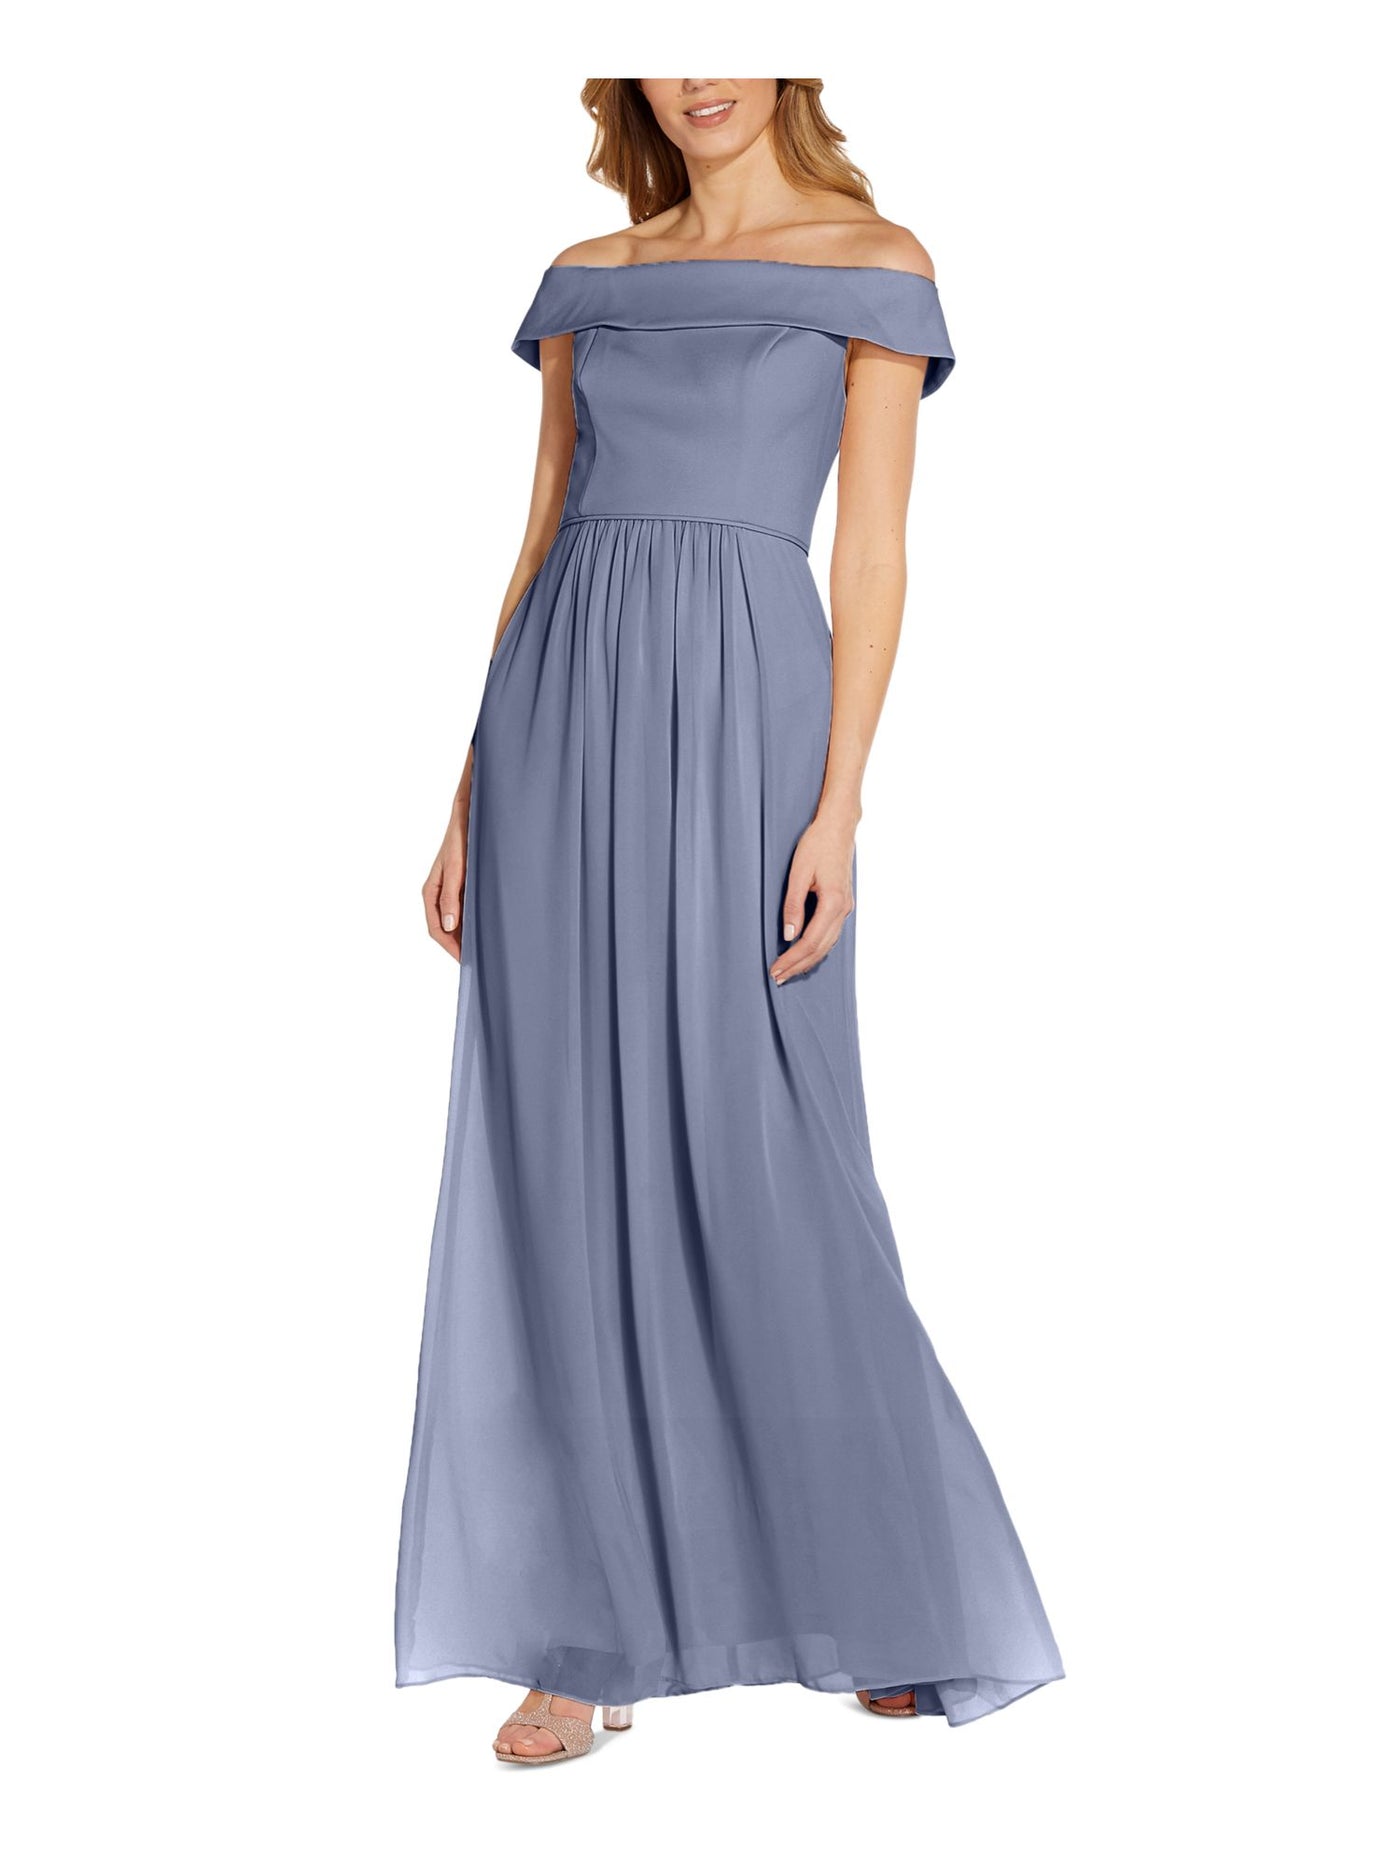 ADRIANNA PAPELL Womens Blue Pleated Zippered Chiffon Short Sleeve Off Shoulder Maxi Formal Fit + Flare Dress 8